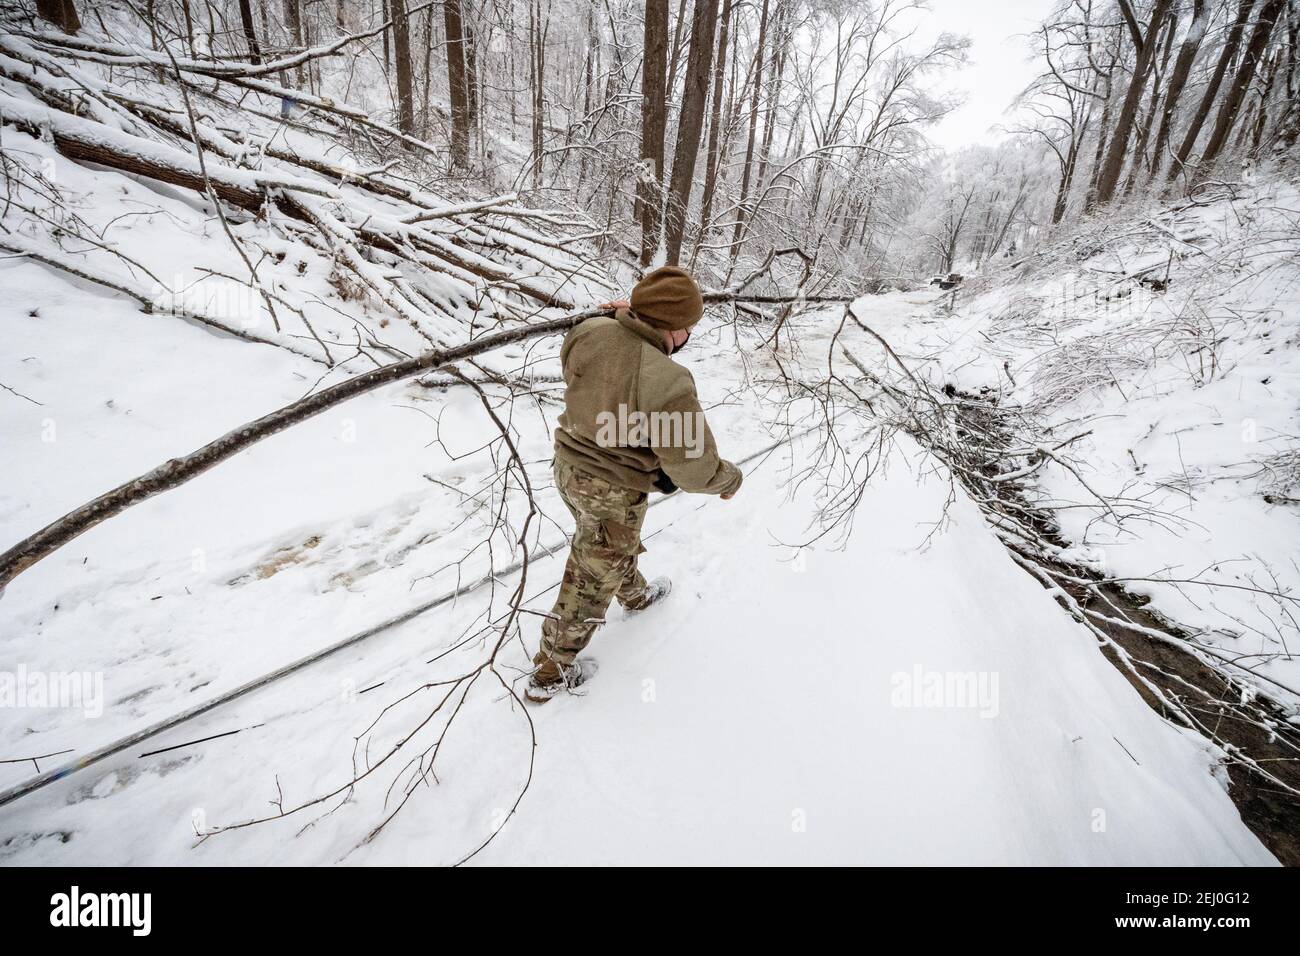 Ceredo, United States. 19th Feb, 2021. A U.S. soldier with the West Virginia National Guard clears debris from a winter storm off a road February 19, 2021 in Ceredo, Wayne County, West Virginia. A large winter storm system earlier in the week left more than 90,000 West Virginians without electric throughout the region, felling trees and making remote roads impassable. Credit: Planetpix/Alamy Live News Stock Photo